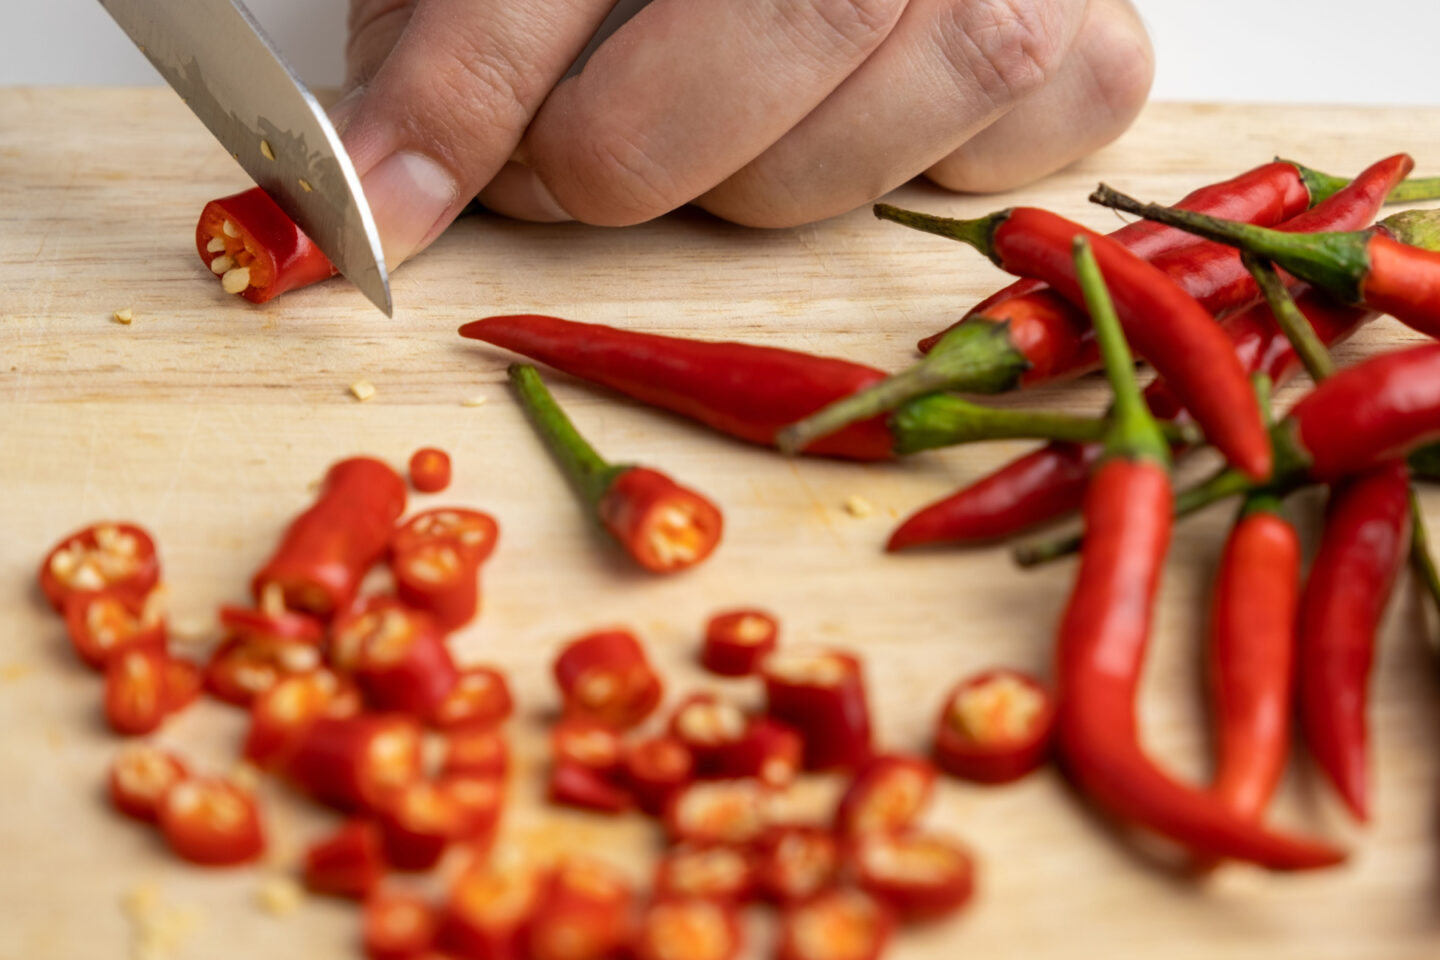 woman cutting chili peppers for cooking